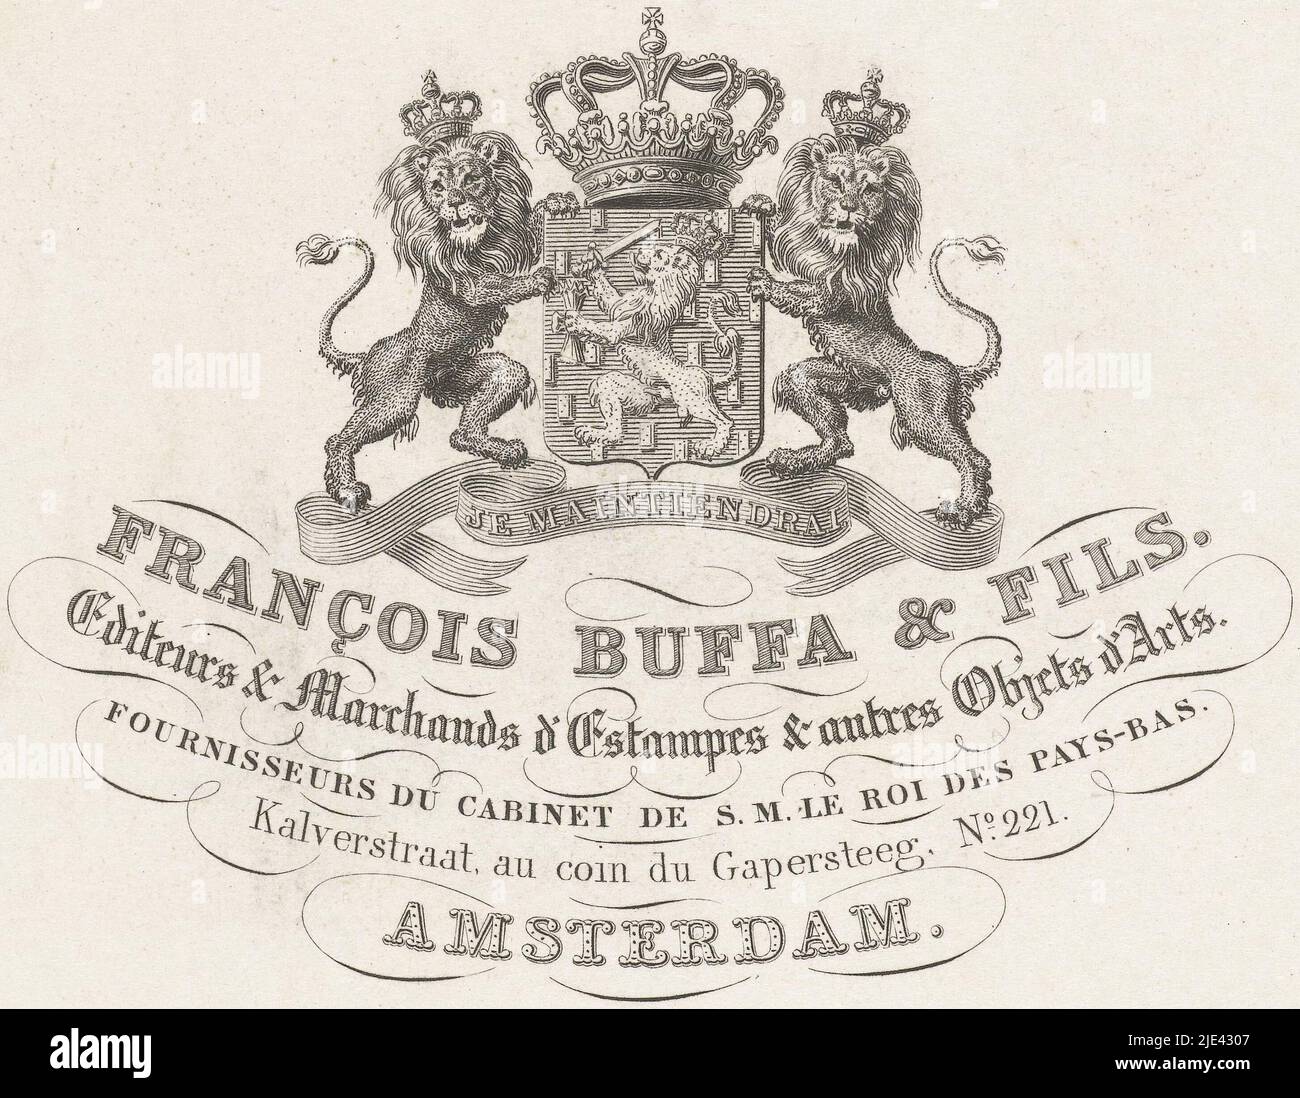 Business card of Frans Buffa and sons, Henricus Wilhelmus Couwenberg, 1830 - 1845, Coat of arms of the Netherlands with motto: Je Maintiendrai; name and address of the firm of Frans Buffa and sons, purveyor to the court., print maker: Henricus Wilhelmus Couwenberg, Amsterdam, 1830 - 1845, paper, etching, h 75 mm × w 102 mm Stock Photo